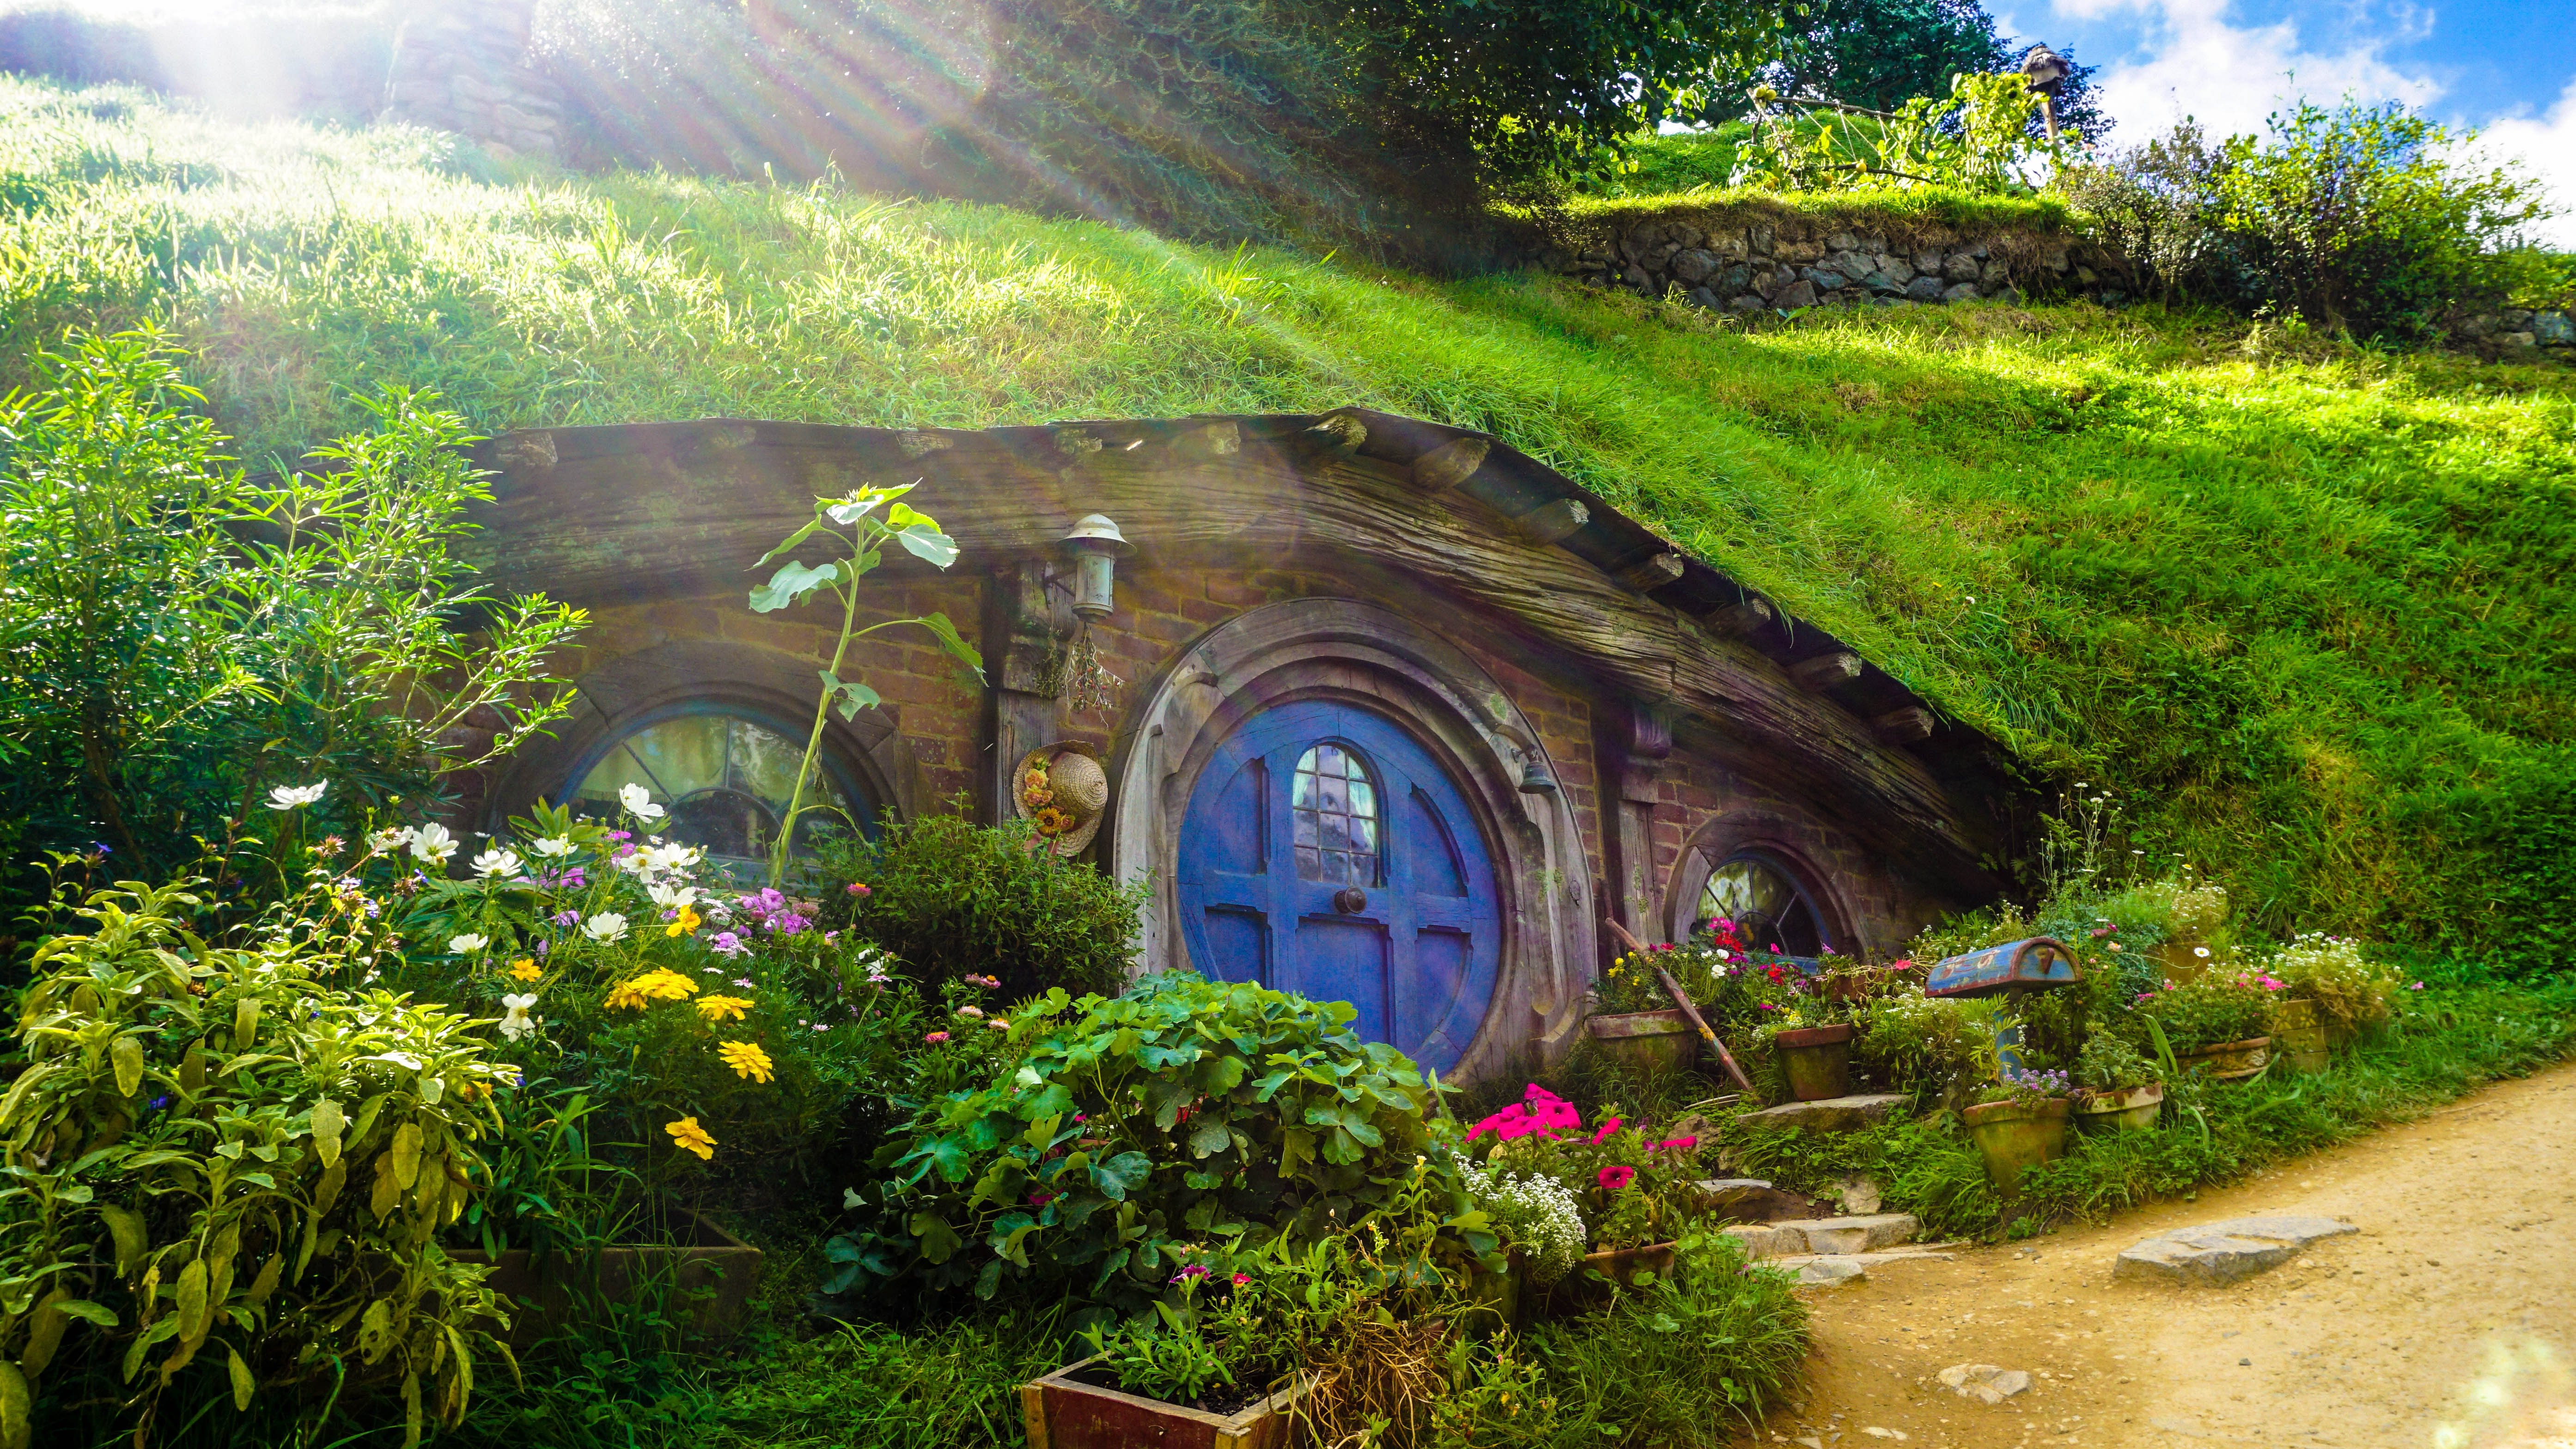 5575x3137 #blue door, #house, #shire, #structure, #green, #countryside, #hobbit, #movie set, #cottage, #garden, #tree, #hobbit hole, # hobbit house, #sunlight, #lord of the ring, #garden house, #window, #grass, #architecture, #Creative Commons